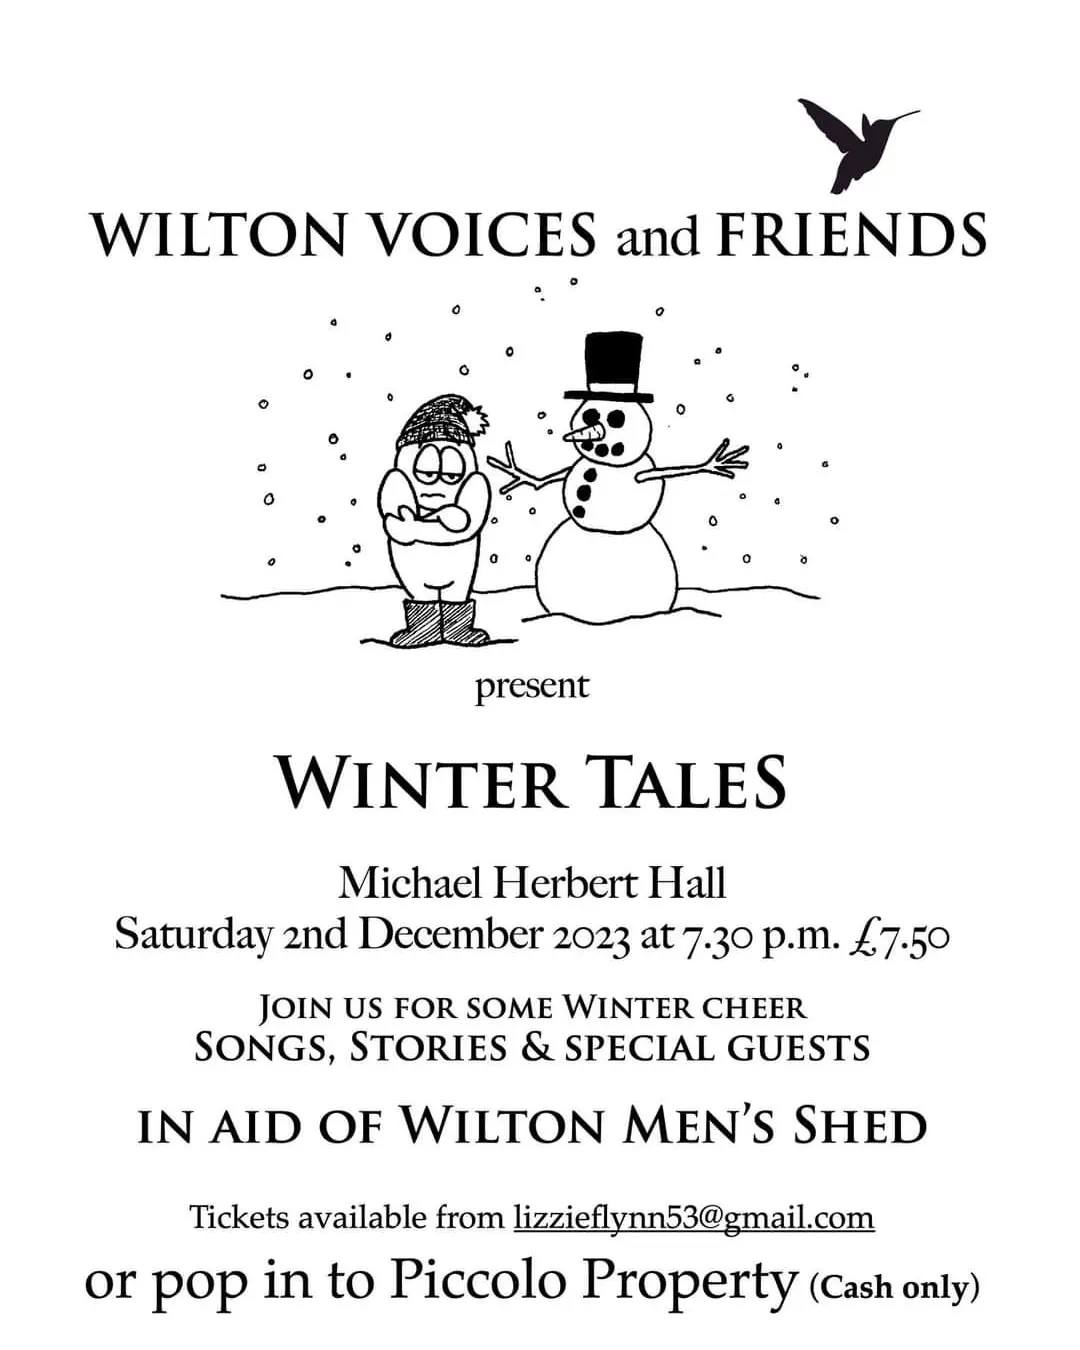 Wilton Voices and Friends present WINTER TALES